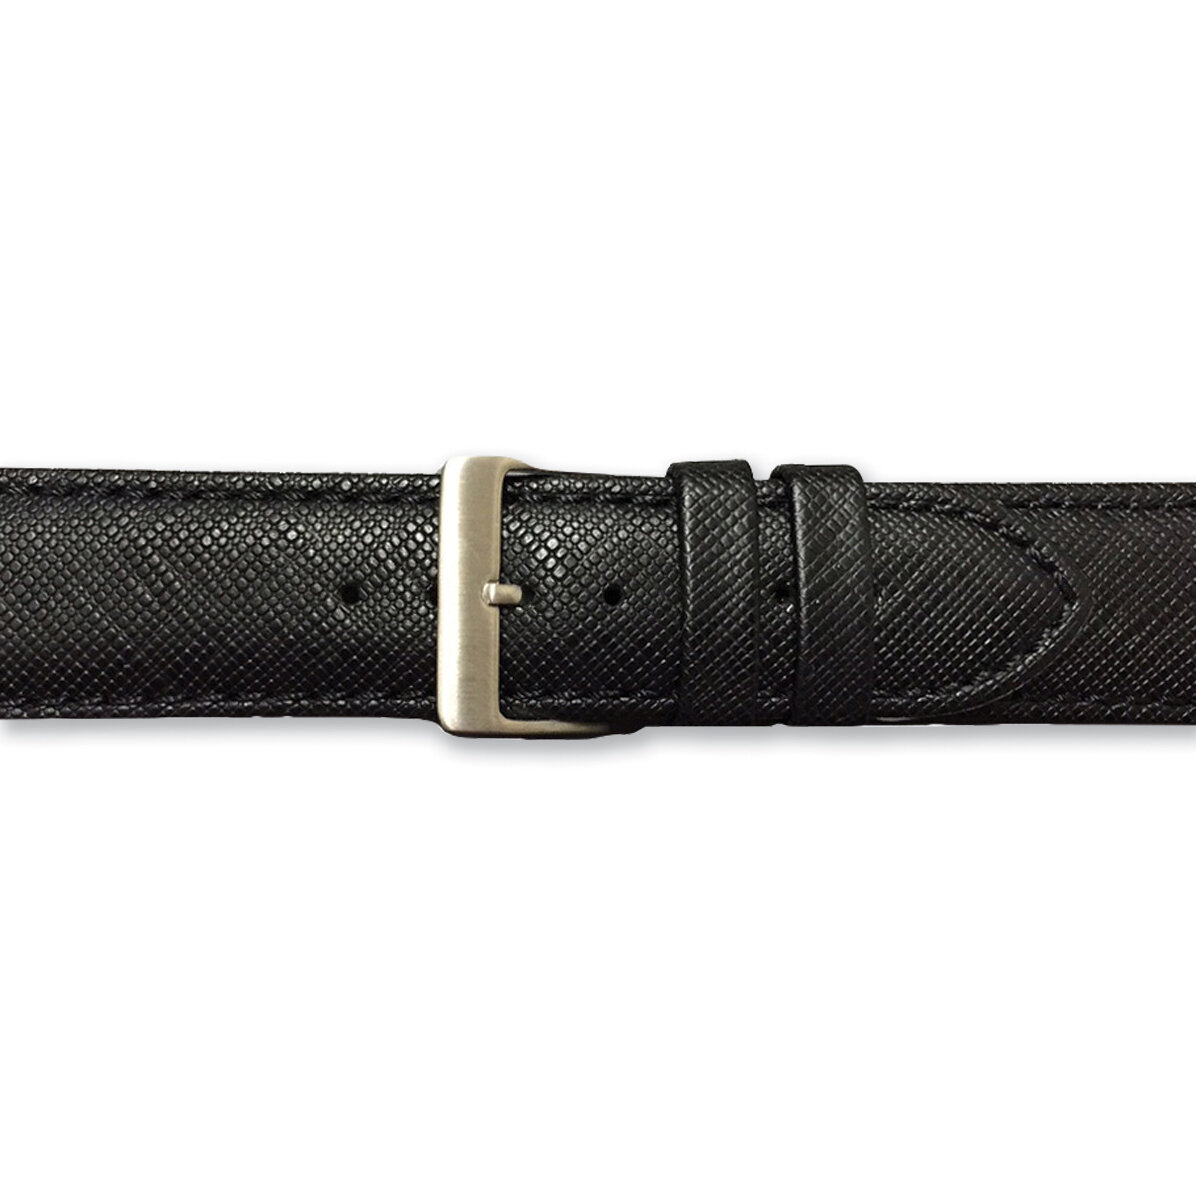 10mm Black Saffiano-style Leather Watch Band BA342-10